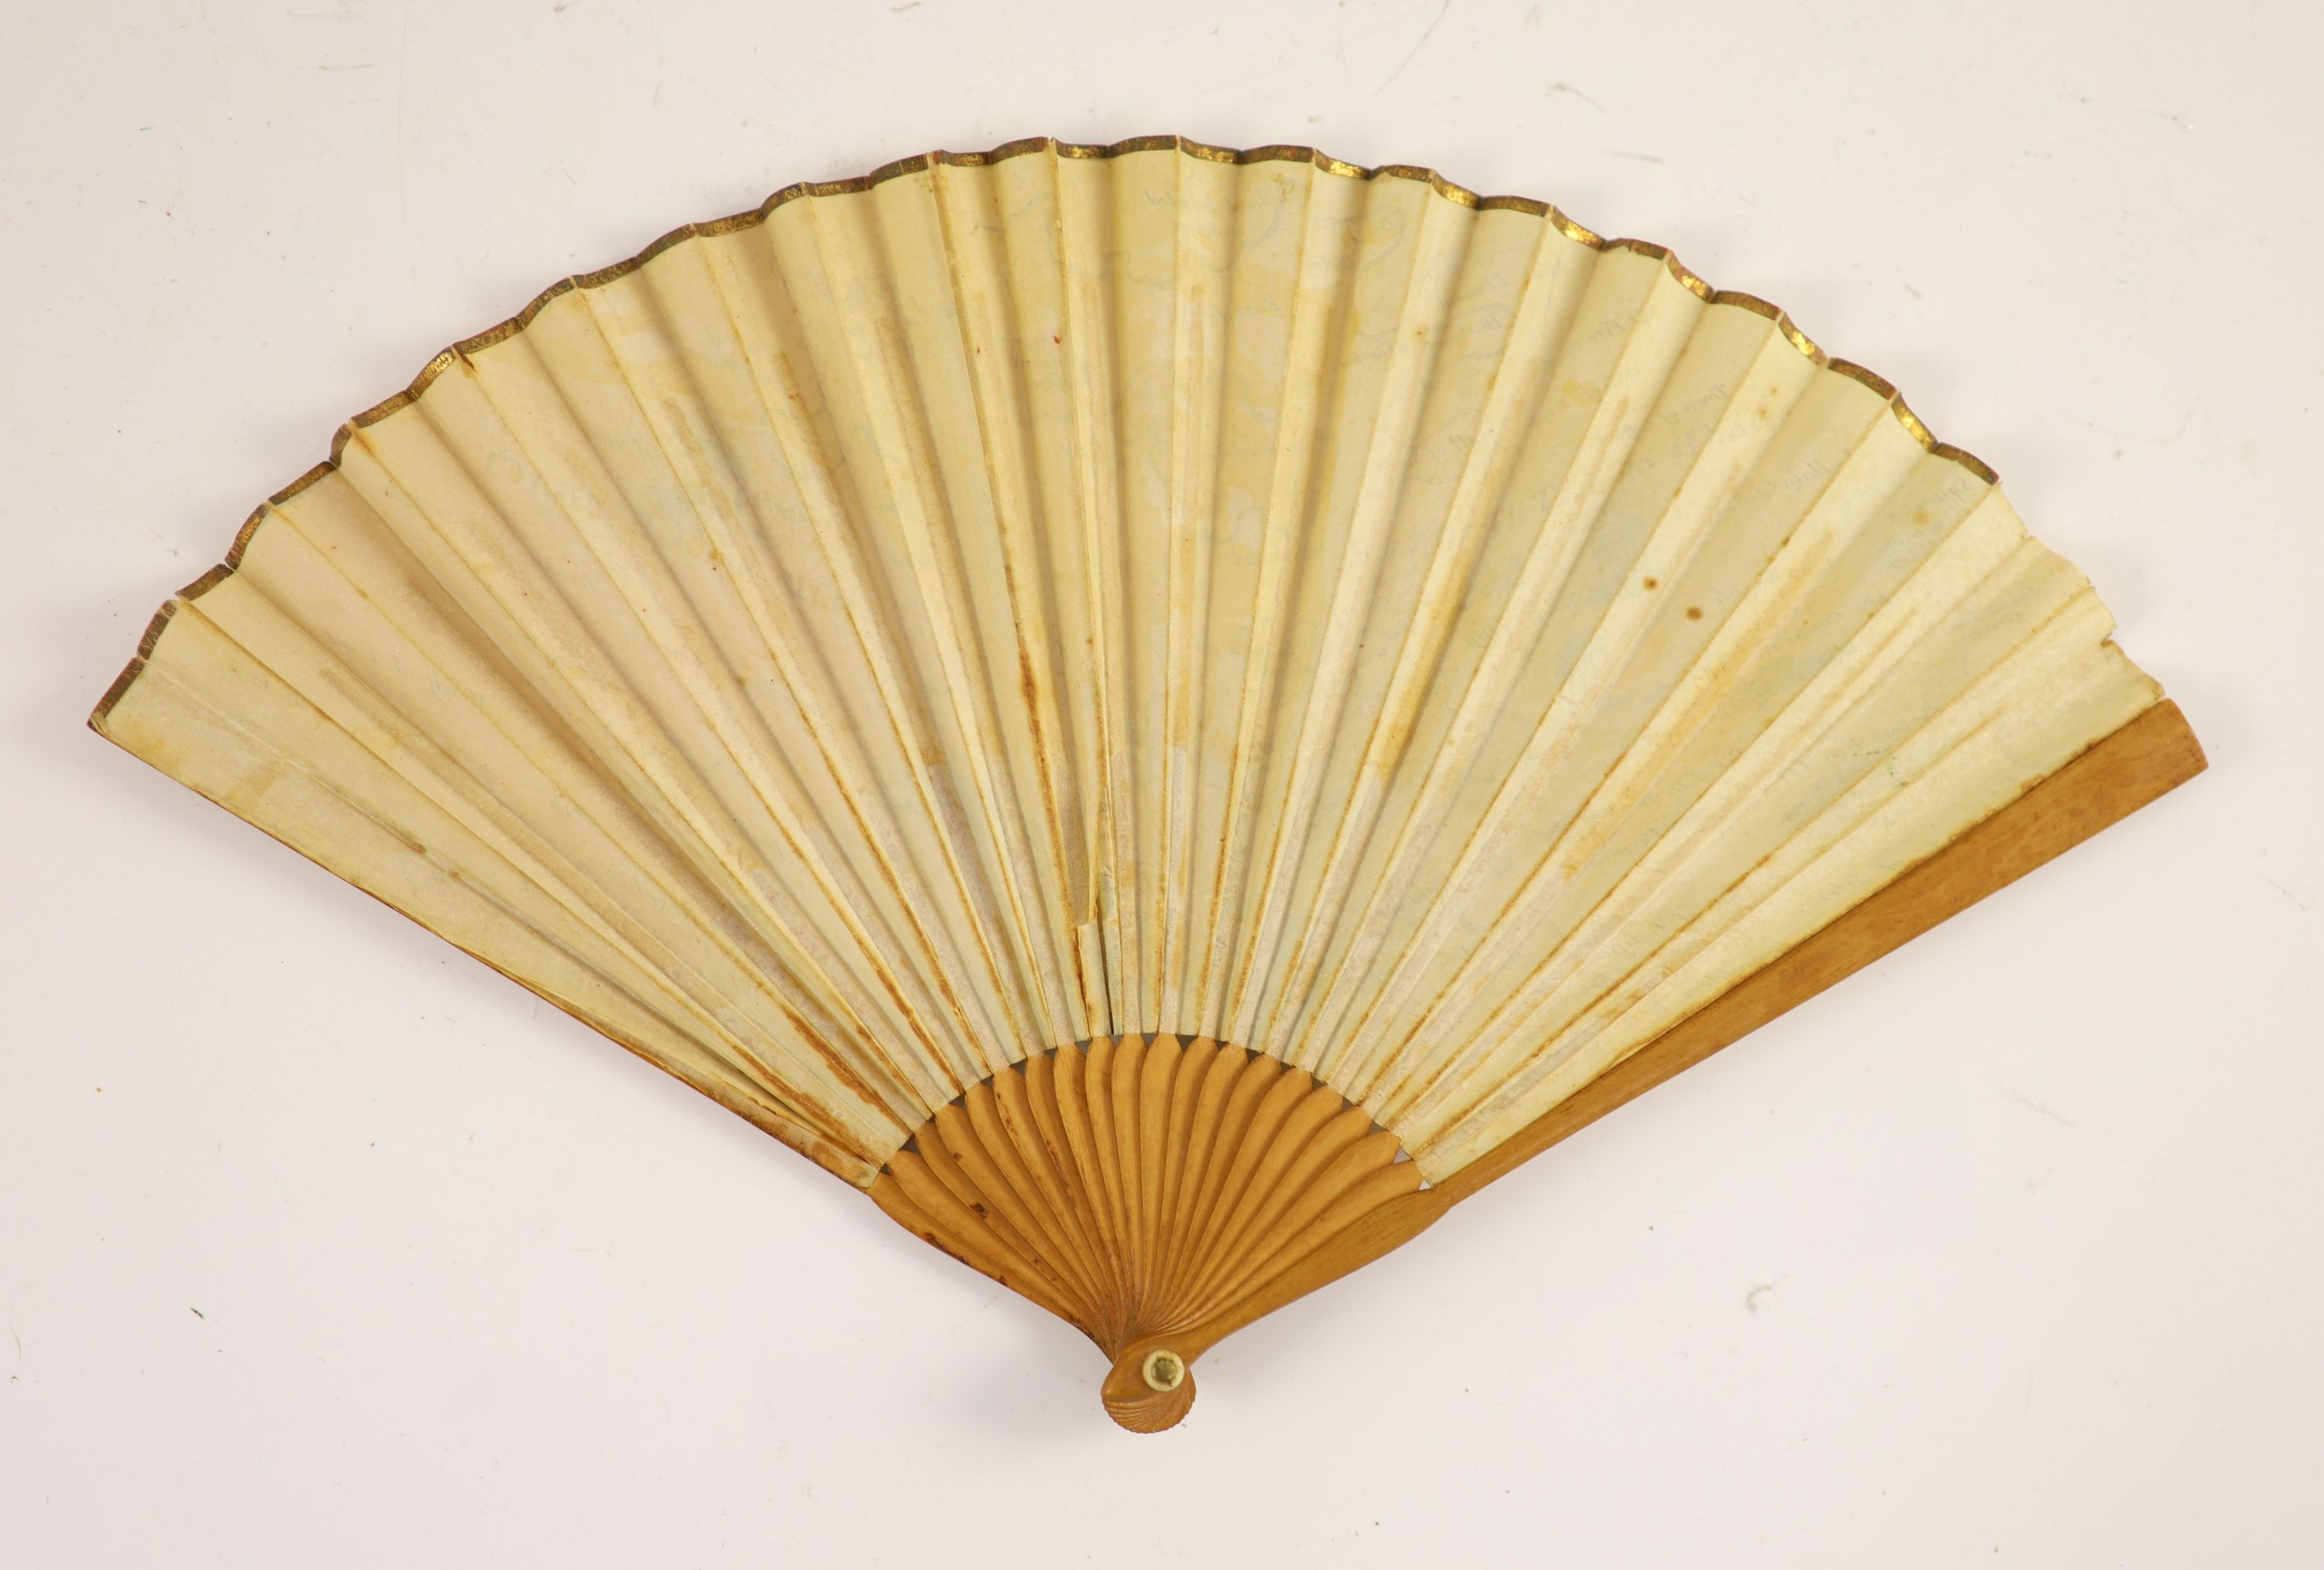 A rare 18th century 'Land of Matrimony' and ‘Land of Celibacy’ fan, 17.5cm long